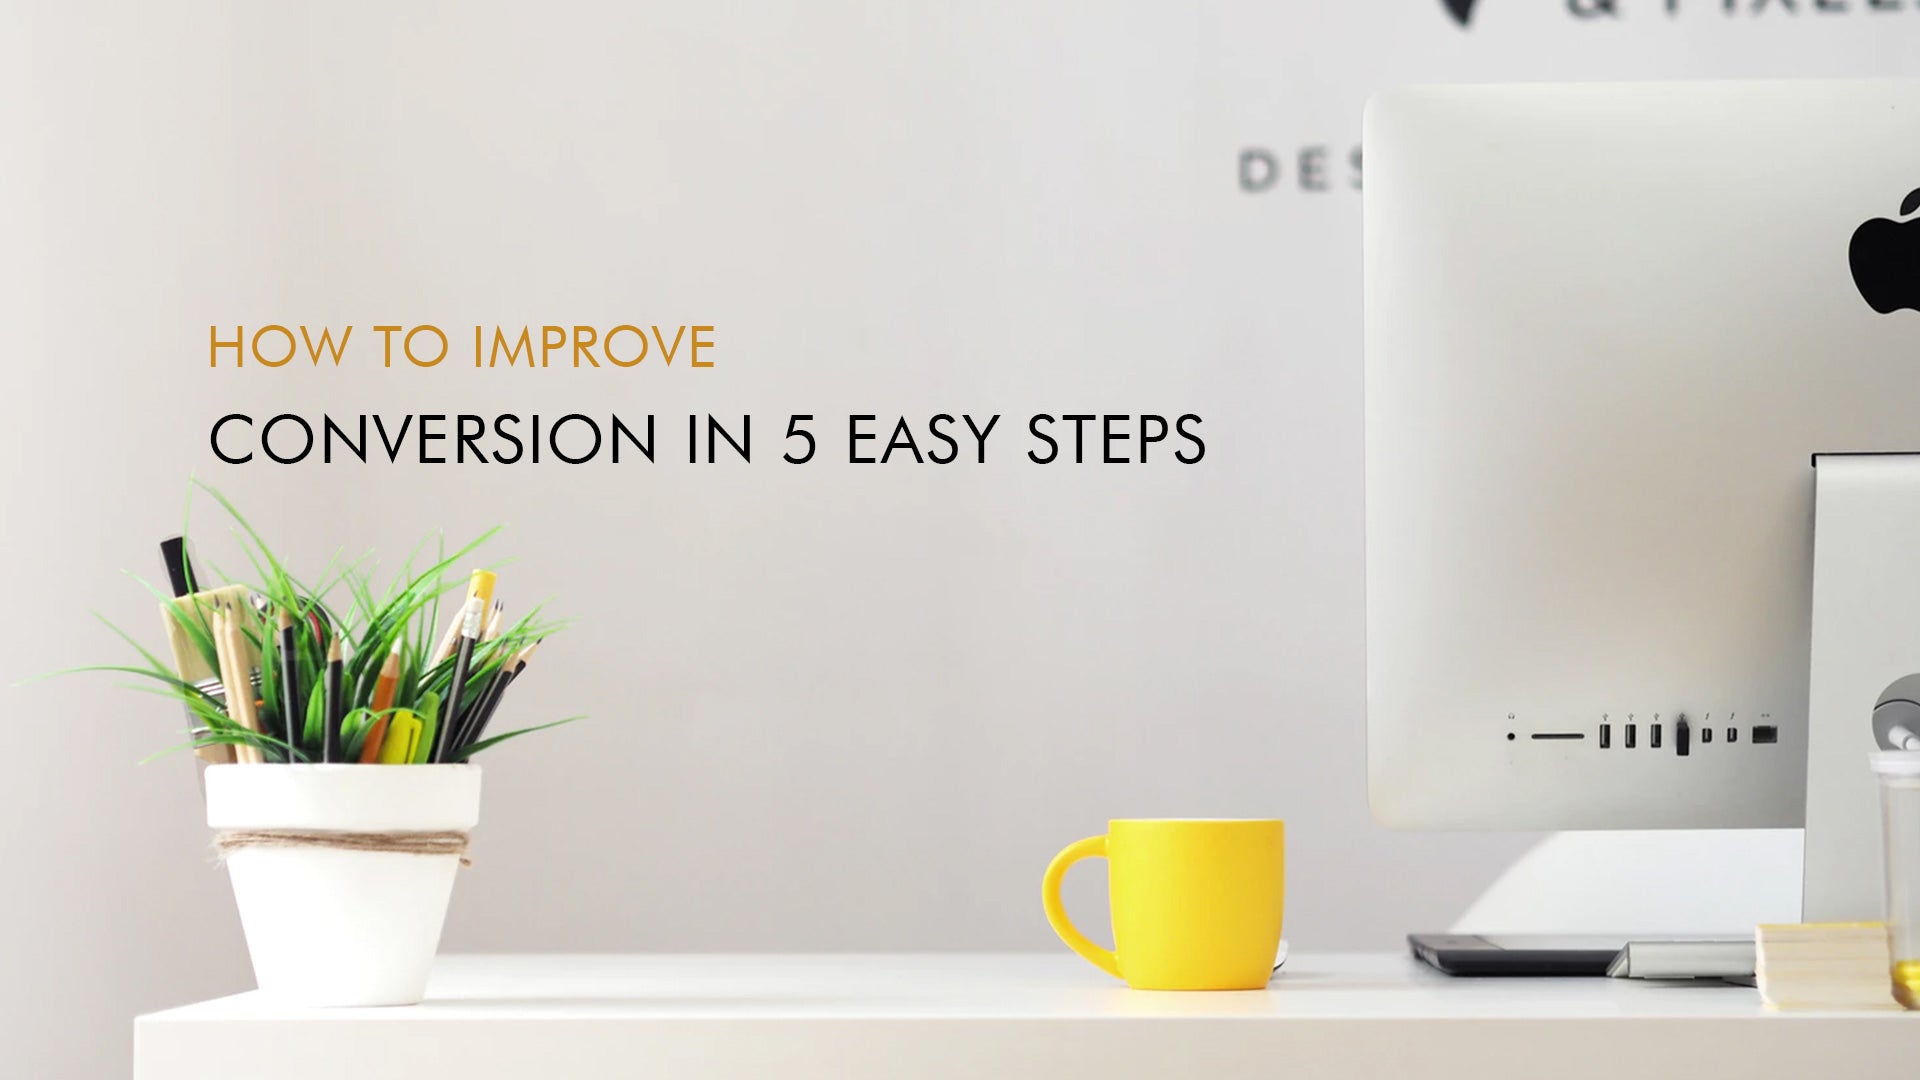 How to Improve Shopify Store Conversion in 5 Easy Steps